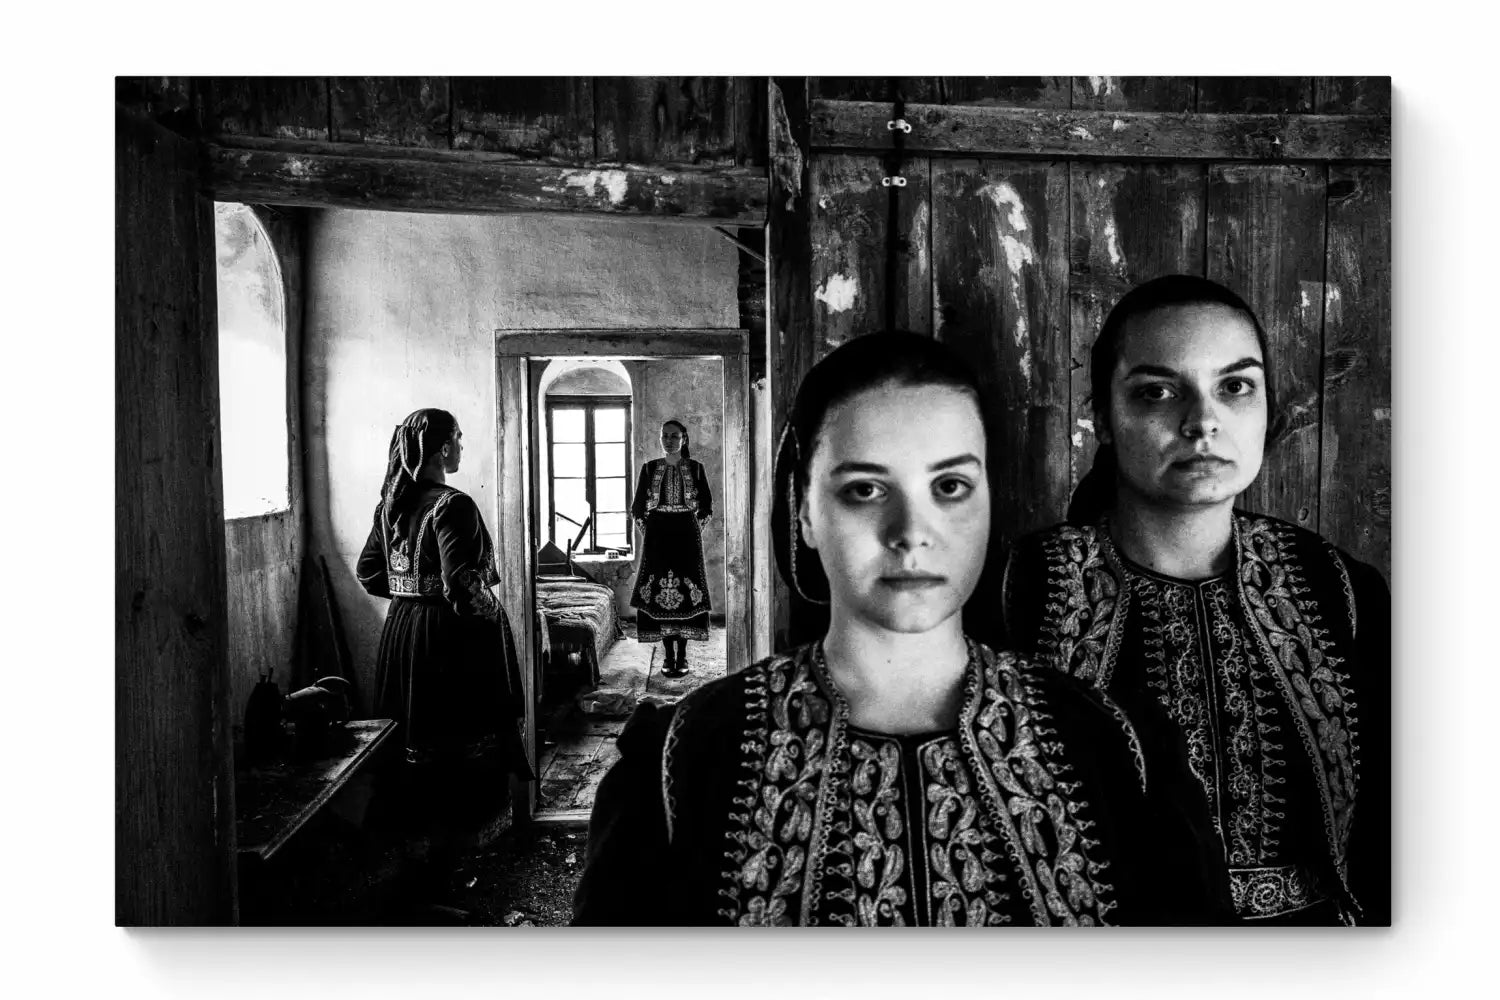 Filiates, Thesprotia, Epirus, Greece | In an Old House | Black-and-White Wall Art Photography - thumb